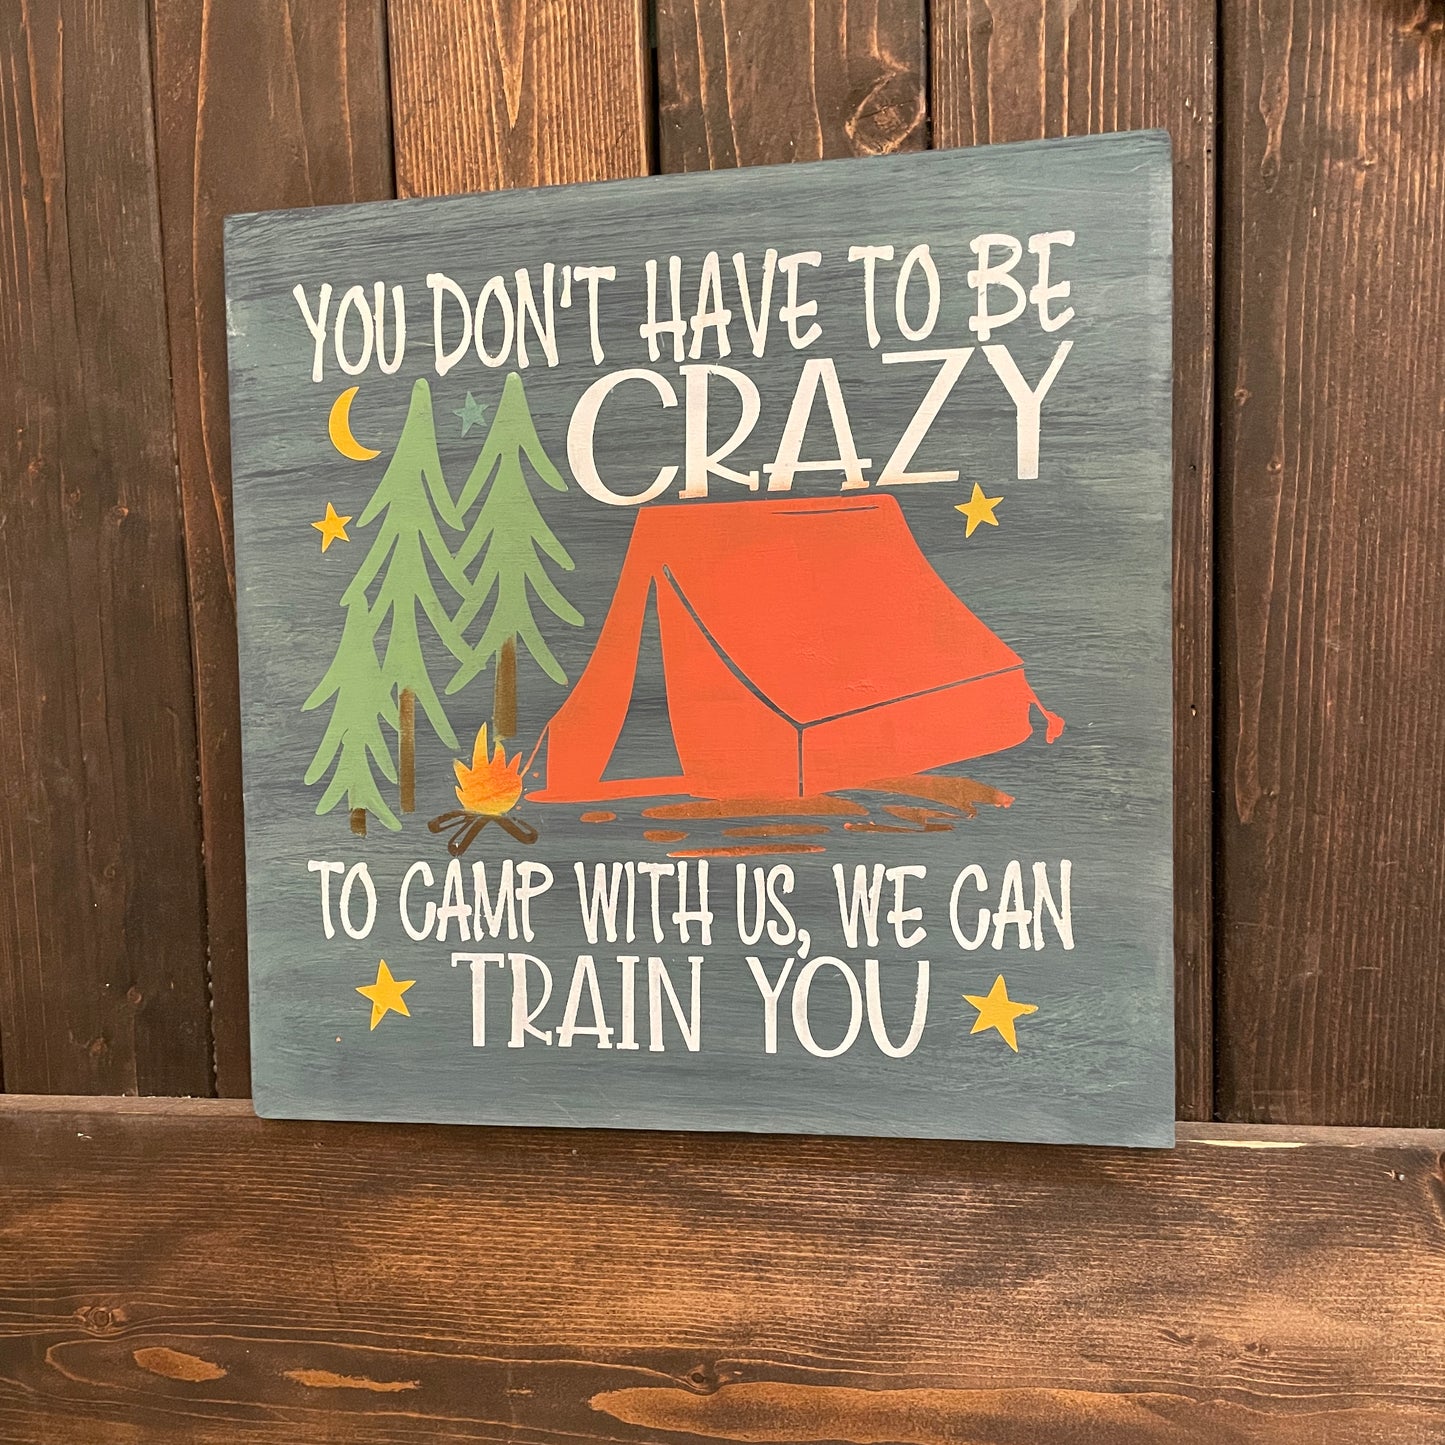 You don't have to be crazy to camp with us: SQUARE DESIGN - Paisley Grace Makery